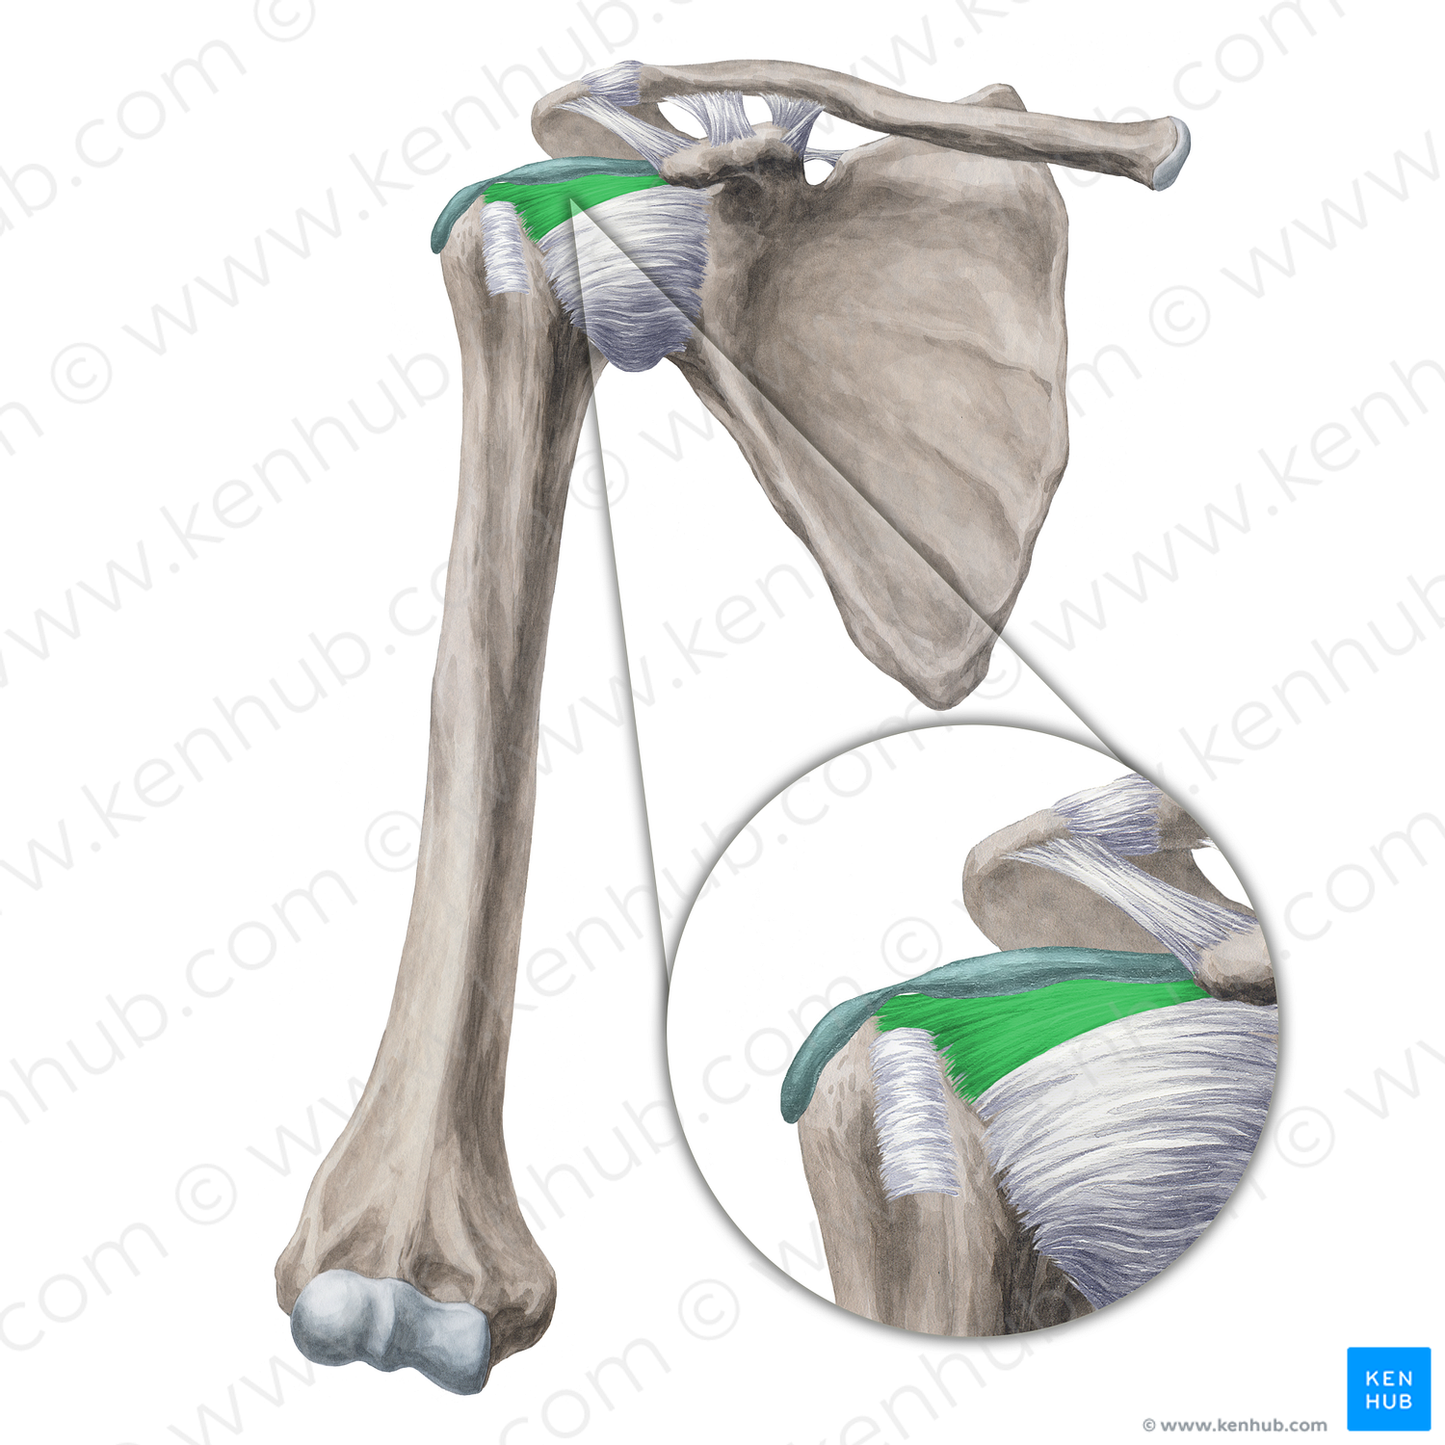 Coracohumeral ligament (#20003)